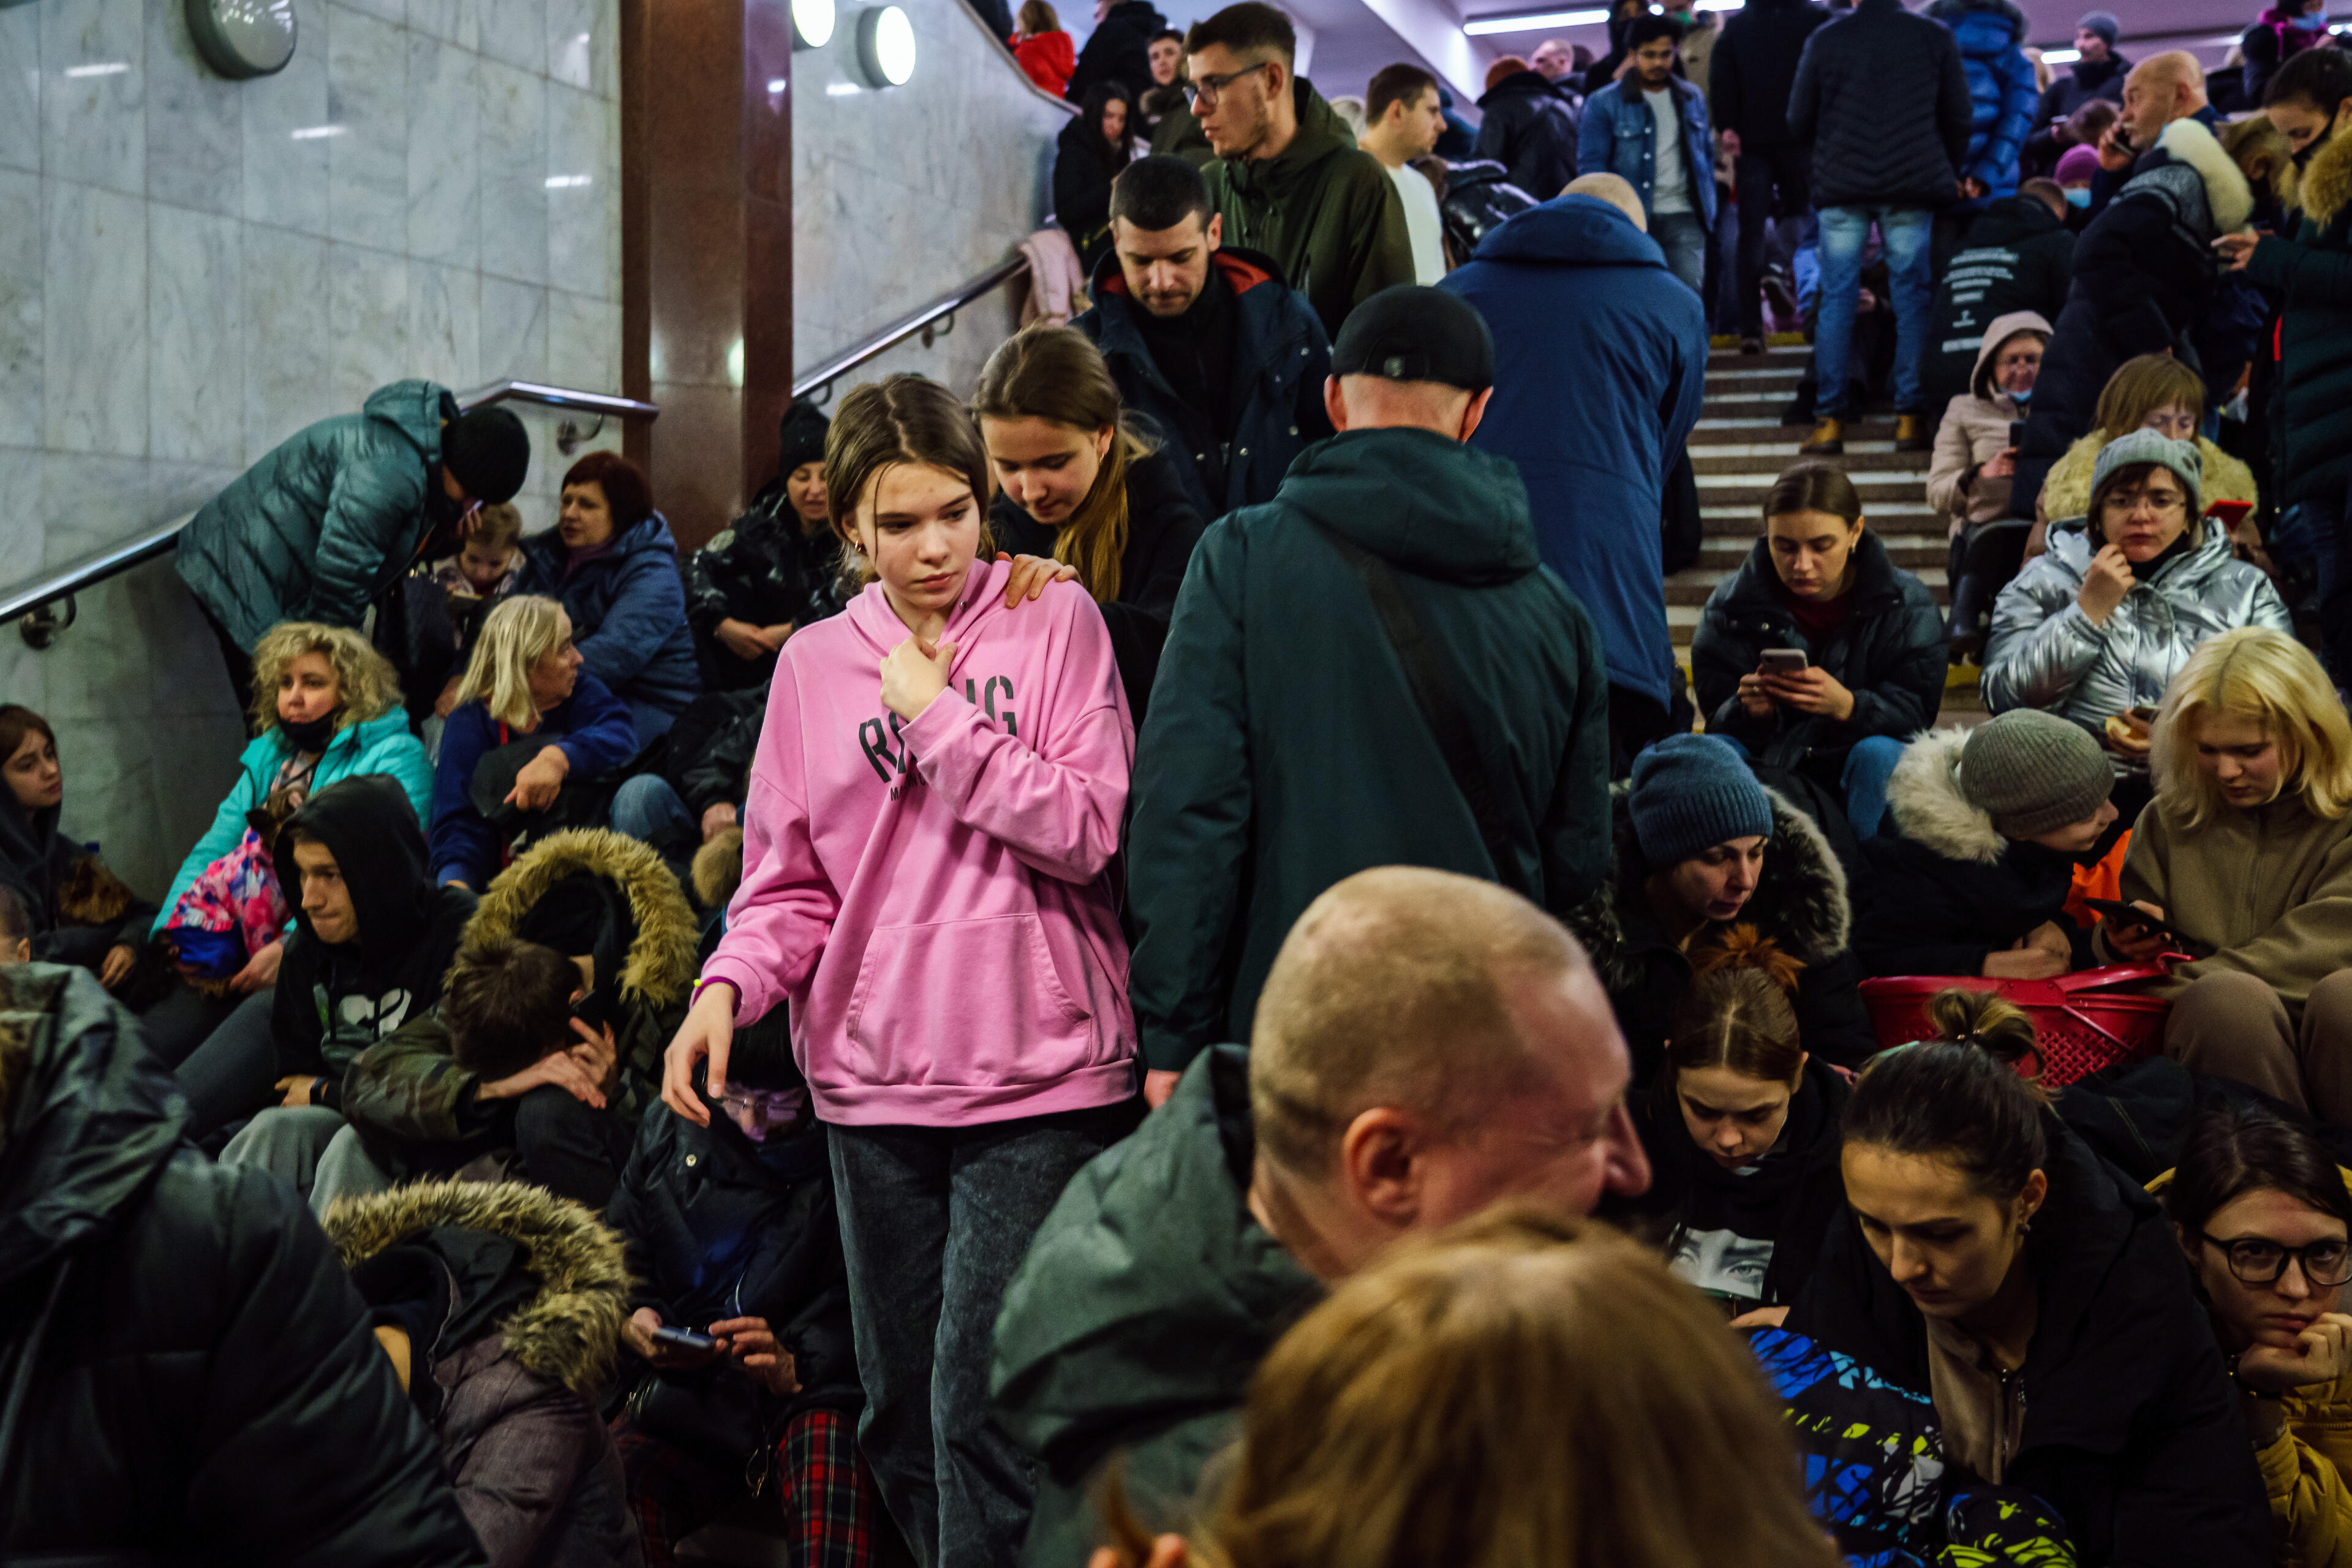 A girl wearing a hoodies stands among people seated on steps as they take shelter in a subway station amid ongoing Russian attacks on cities in Ukraine